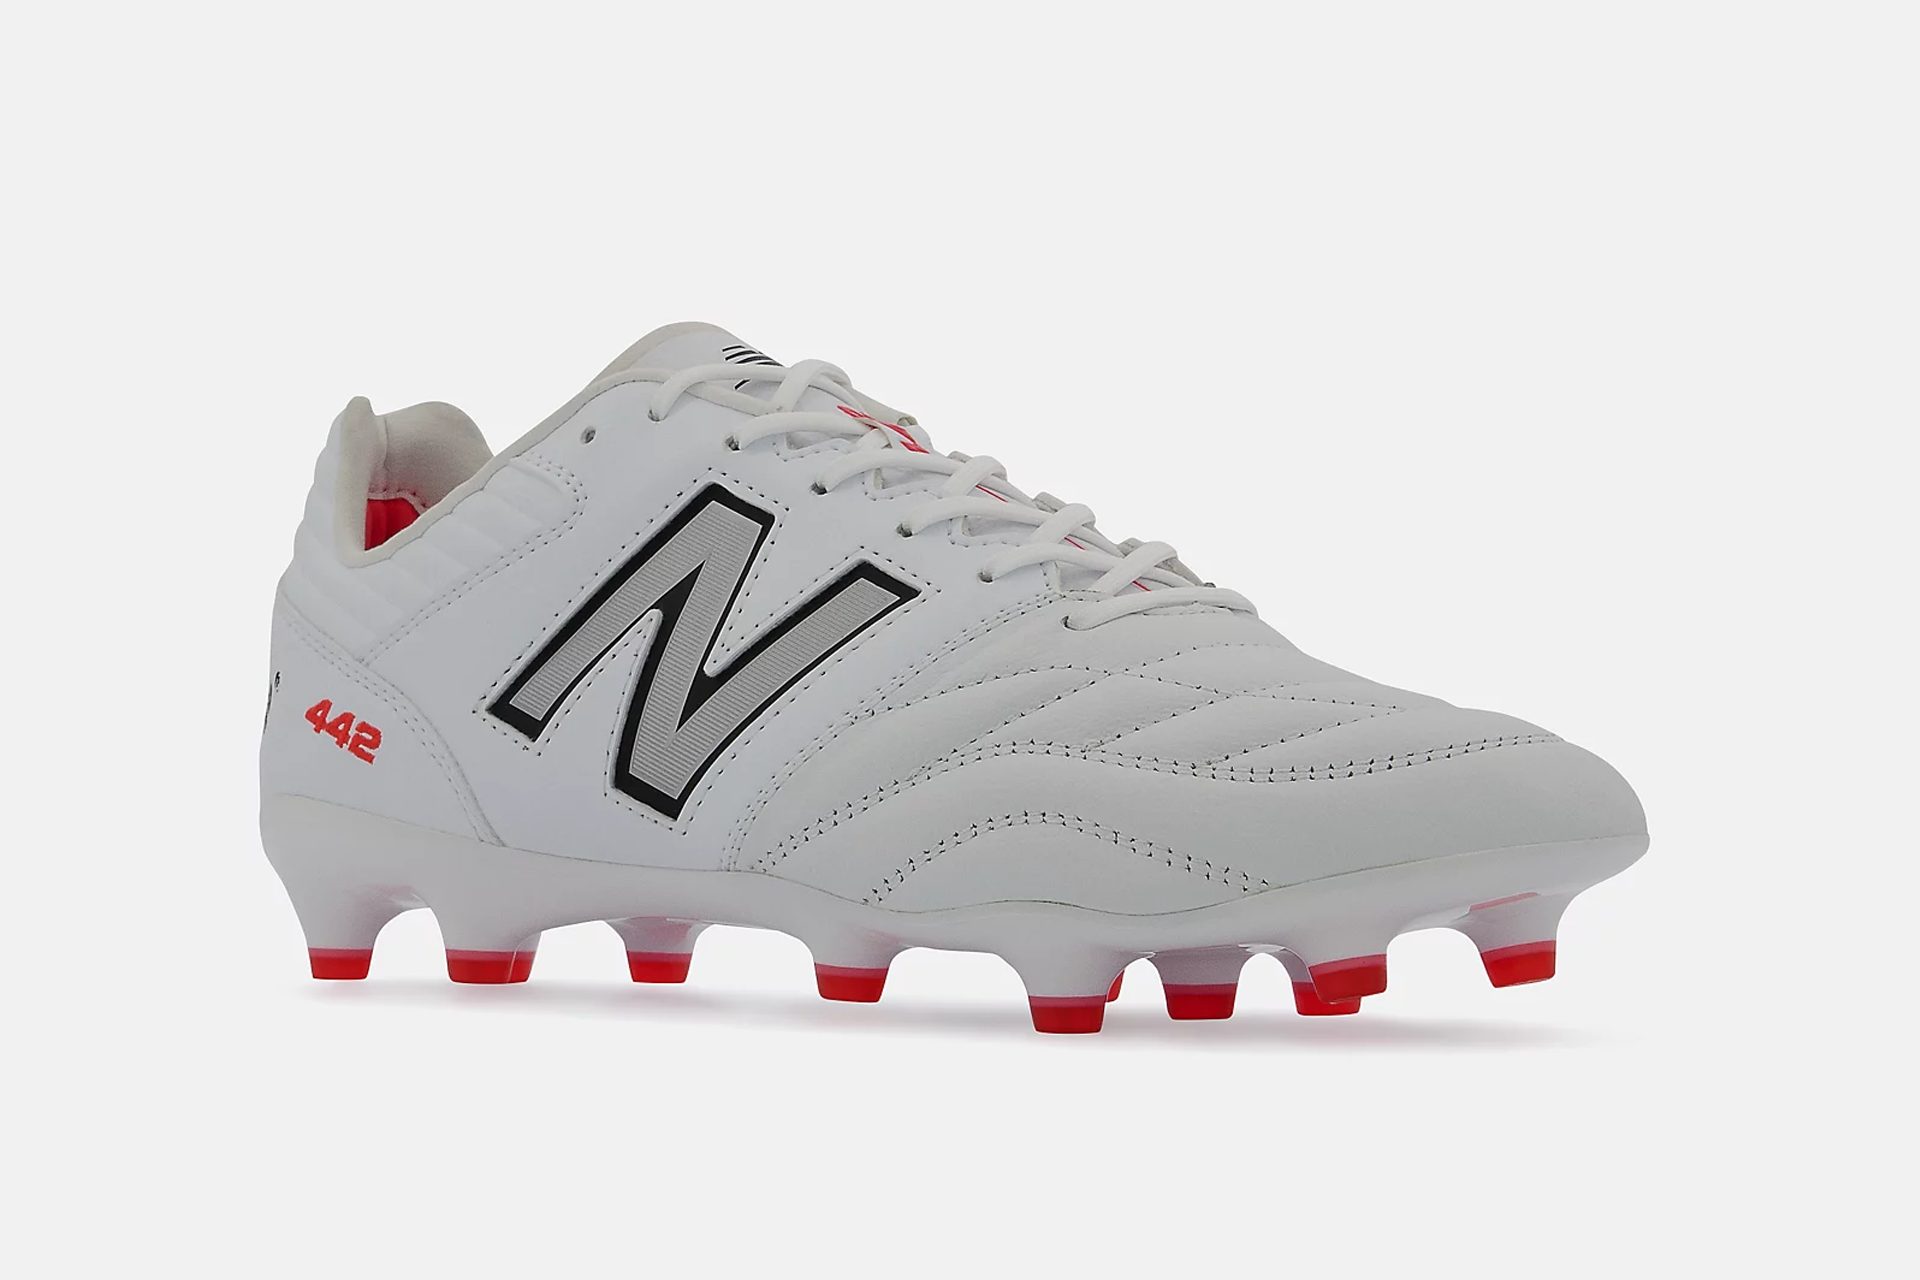 New Balance 442 V2 Pro FG Wide rugby boots Singapore